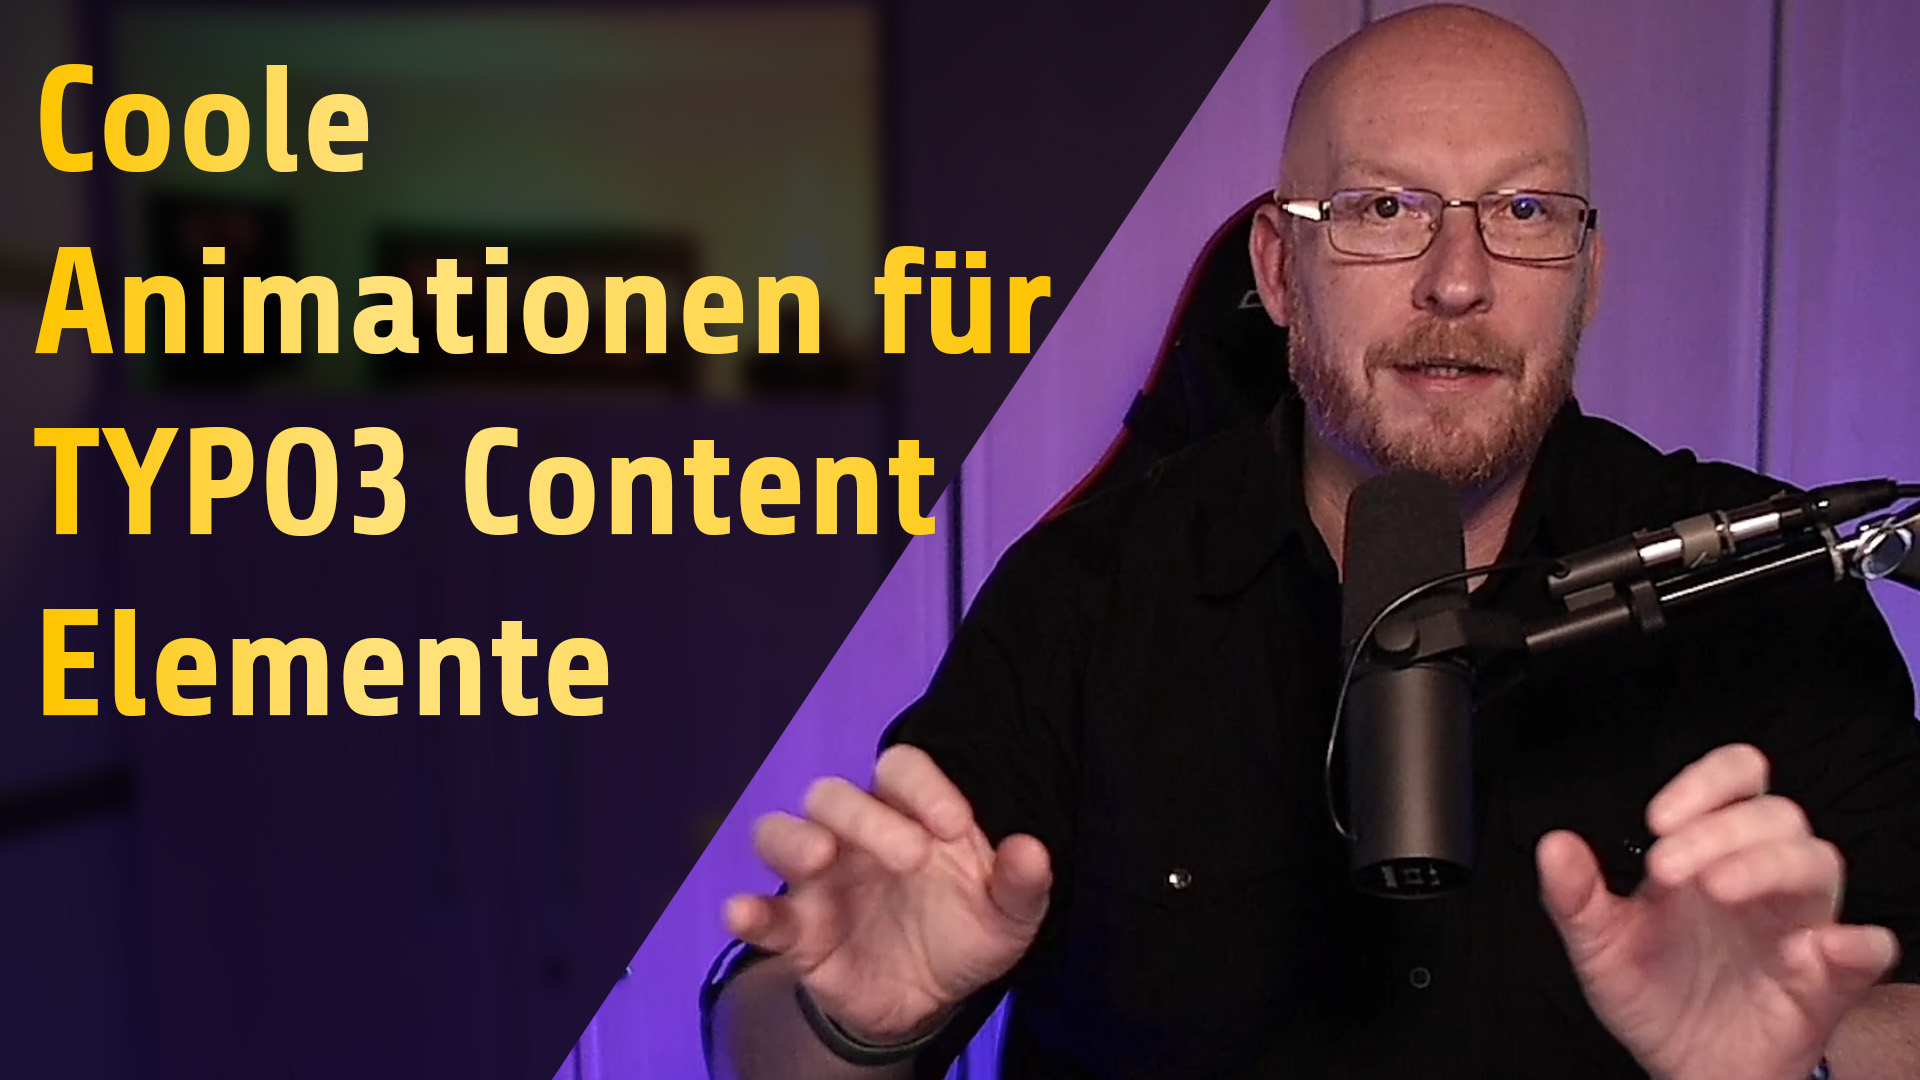 You are currently viewing Coole Animationen für TYPO3 Content Elemente